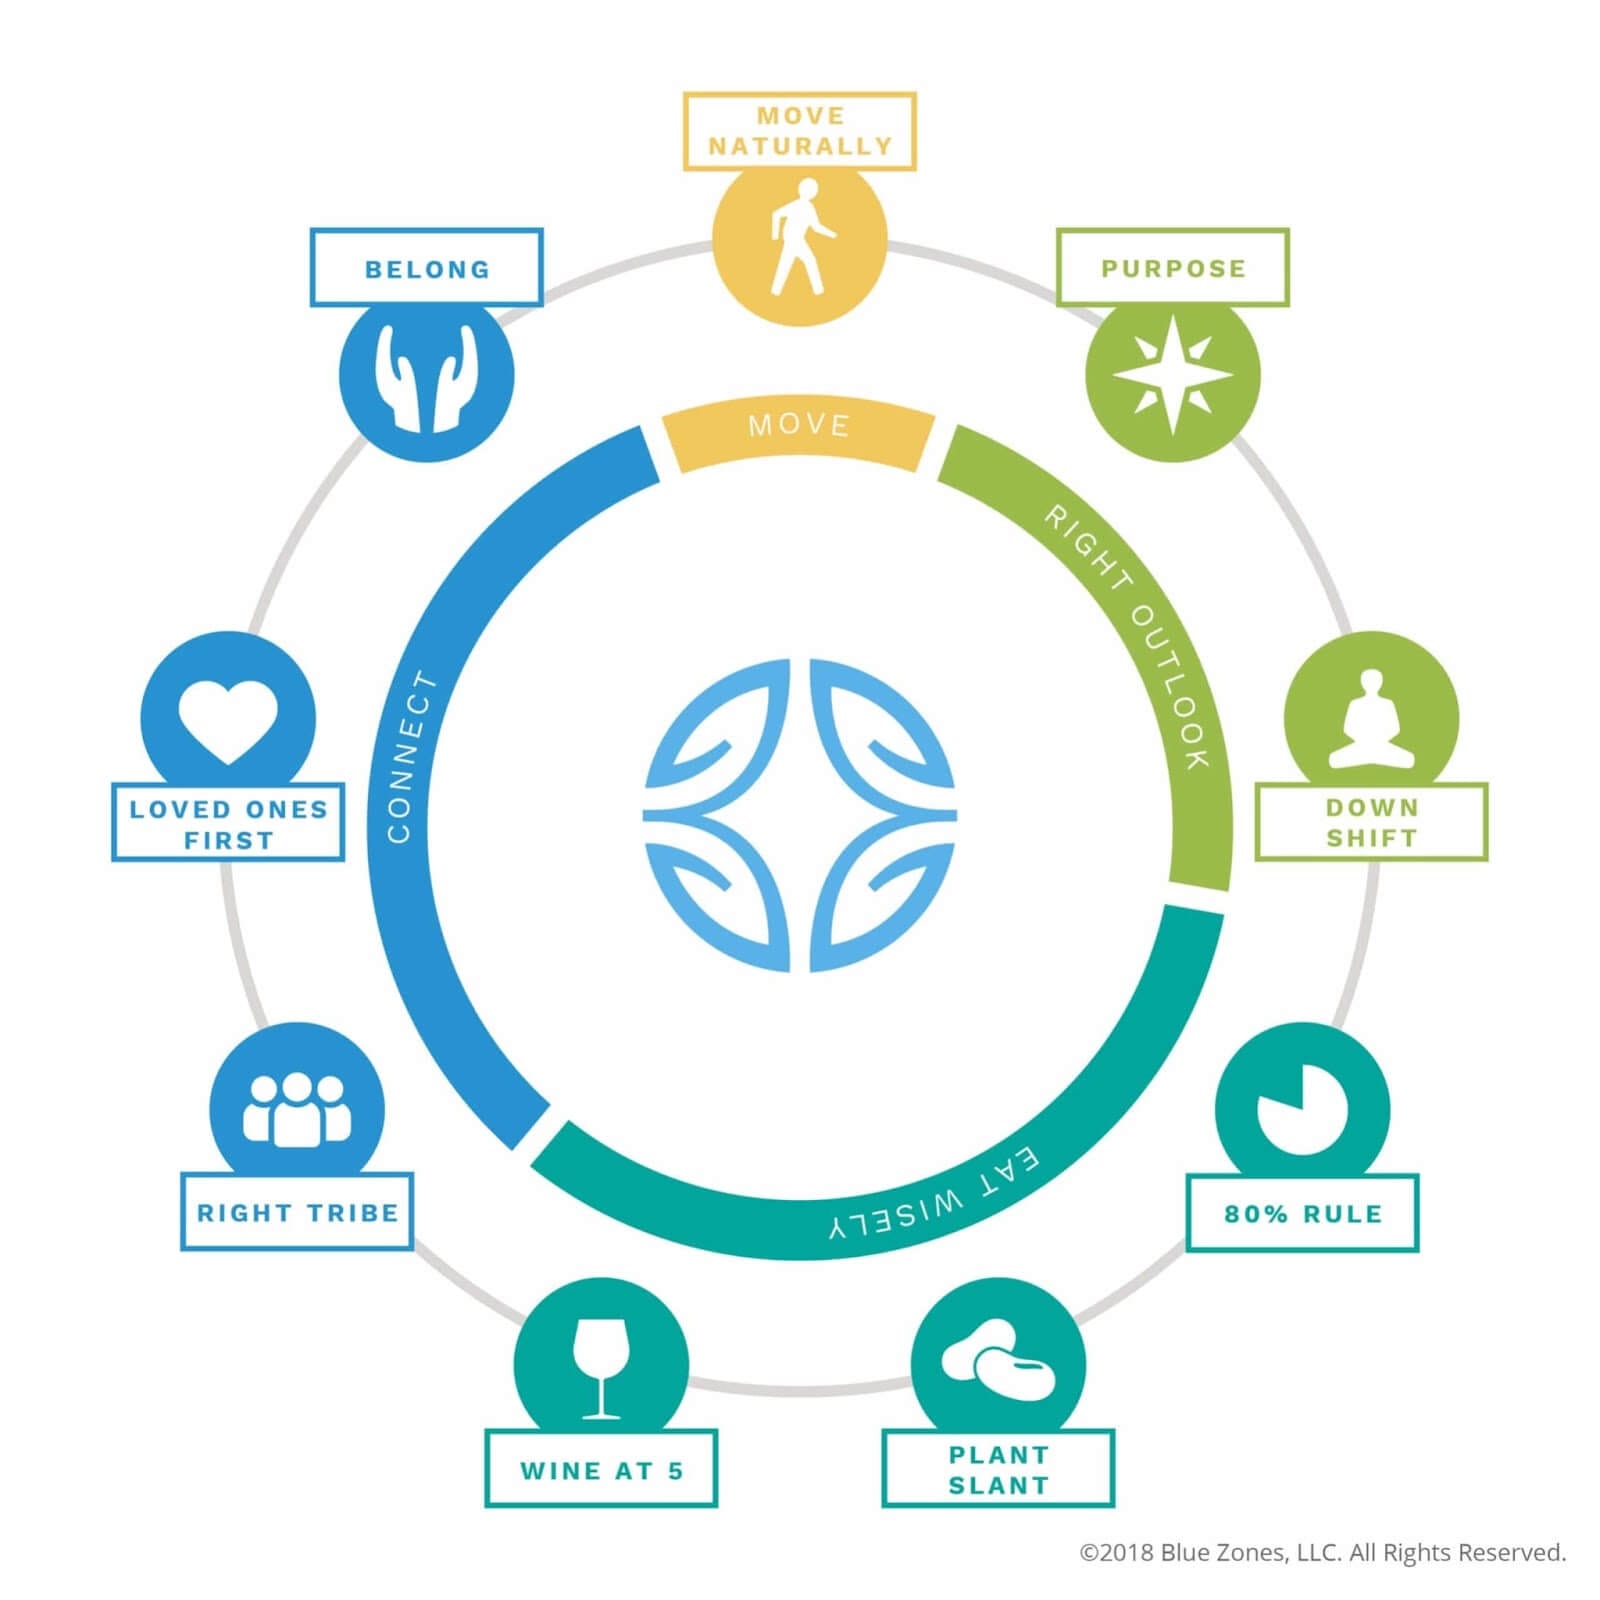 A graphic illustrating the blue zones